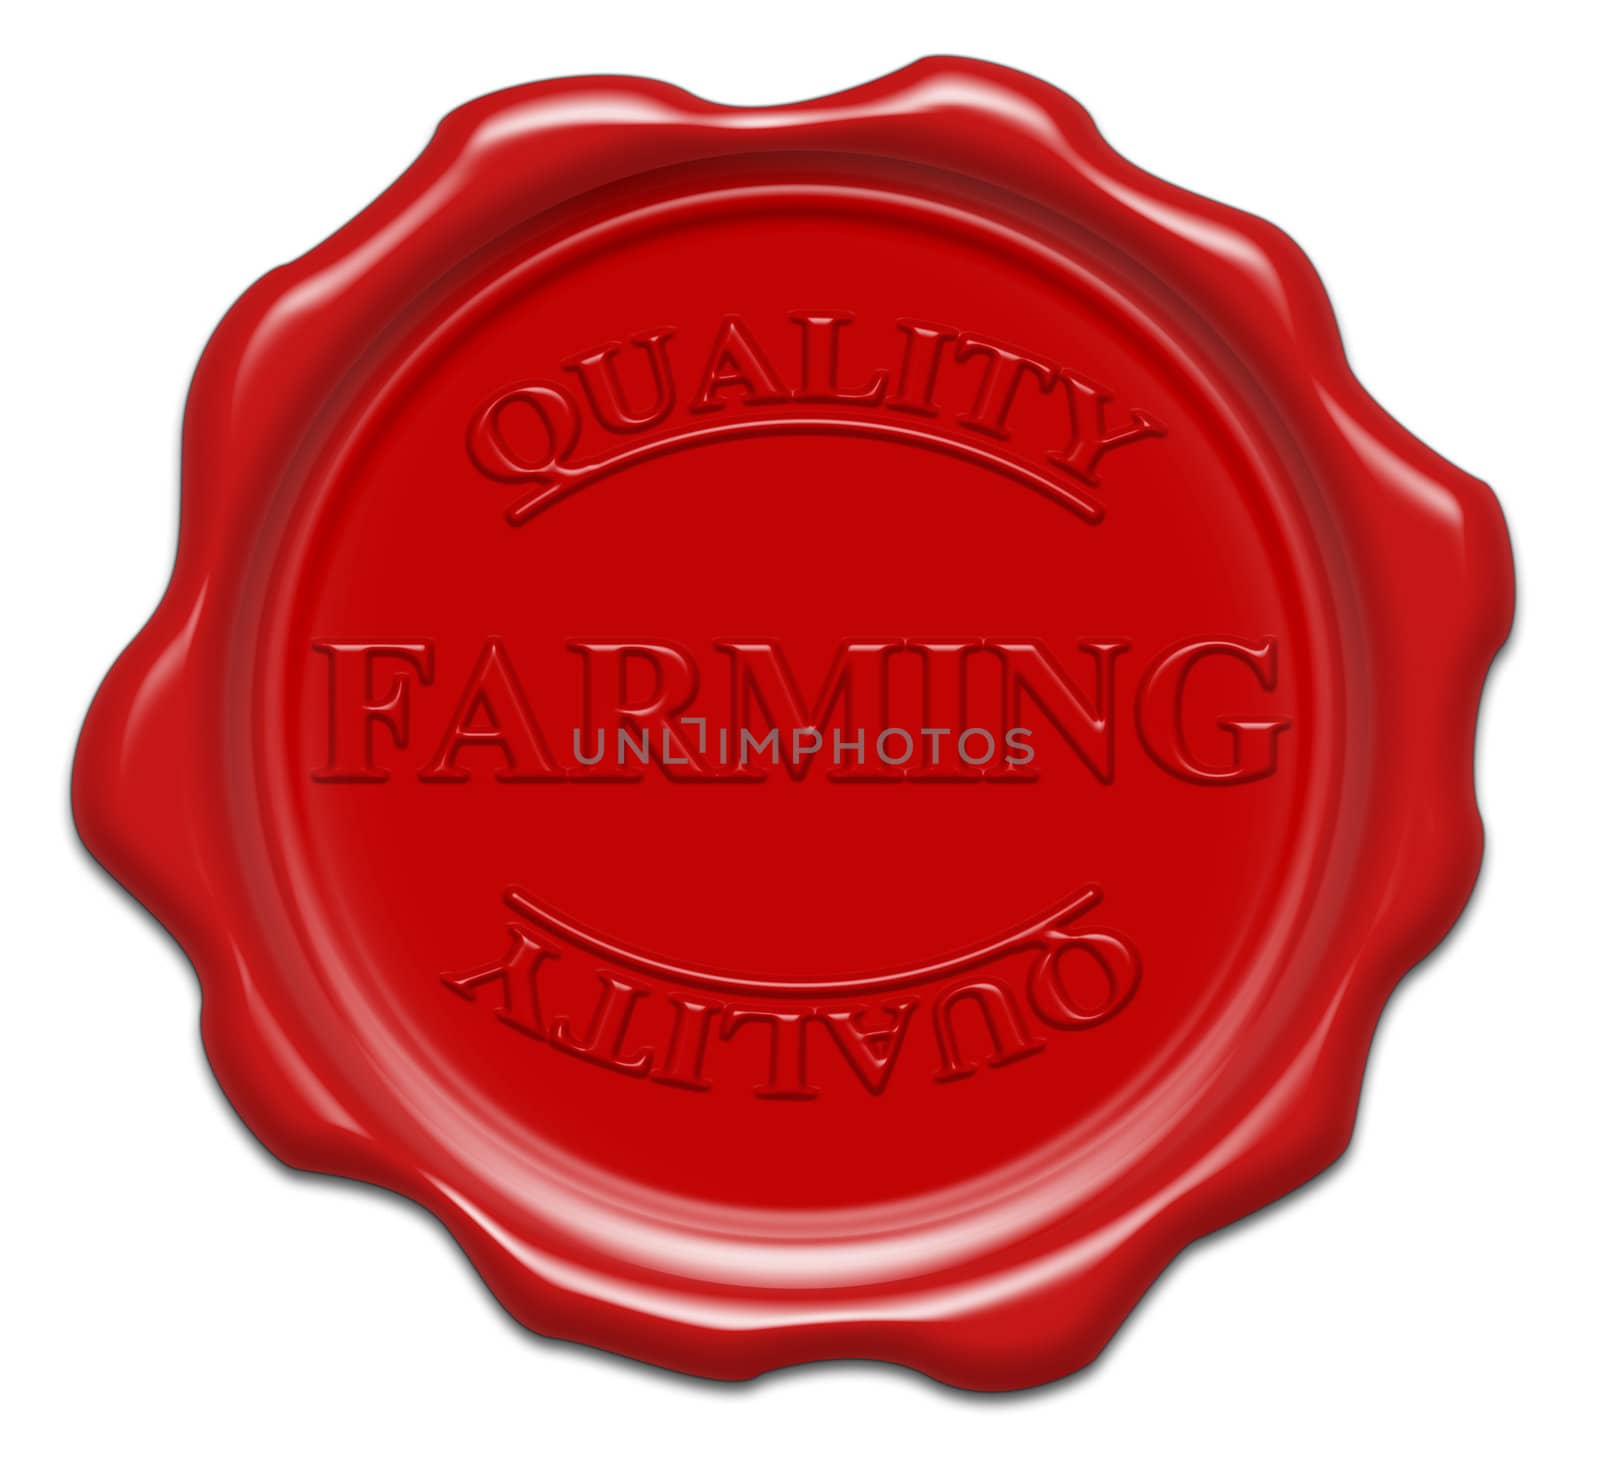 quality farming - illustration red wax seal isolated on white ba by mozzyb